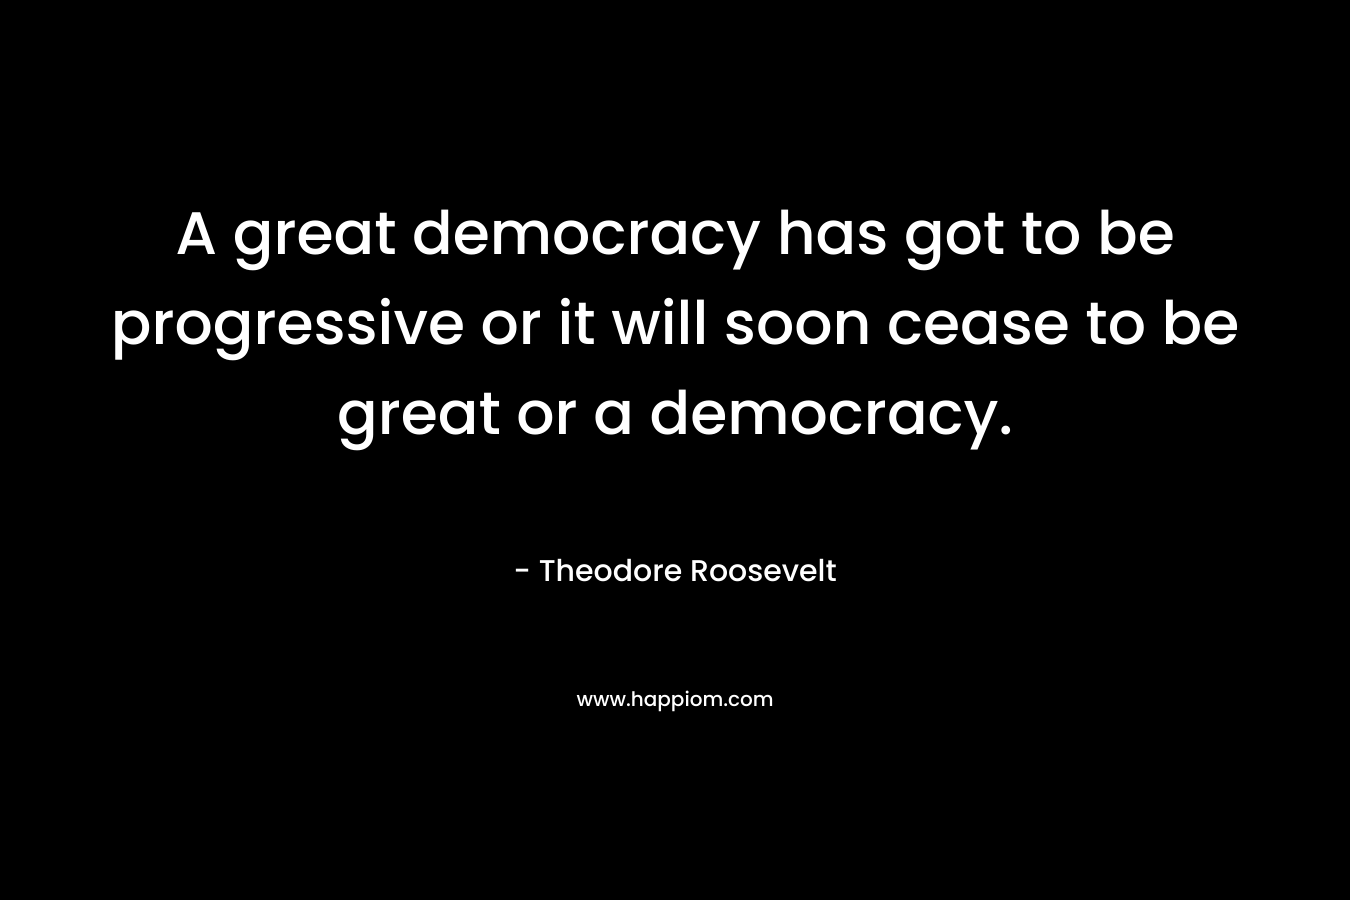 A great democracy has got to be progressive or it will soon cease to be great or a democracy. – Theodore Roosevelt